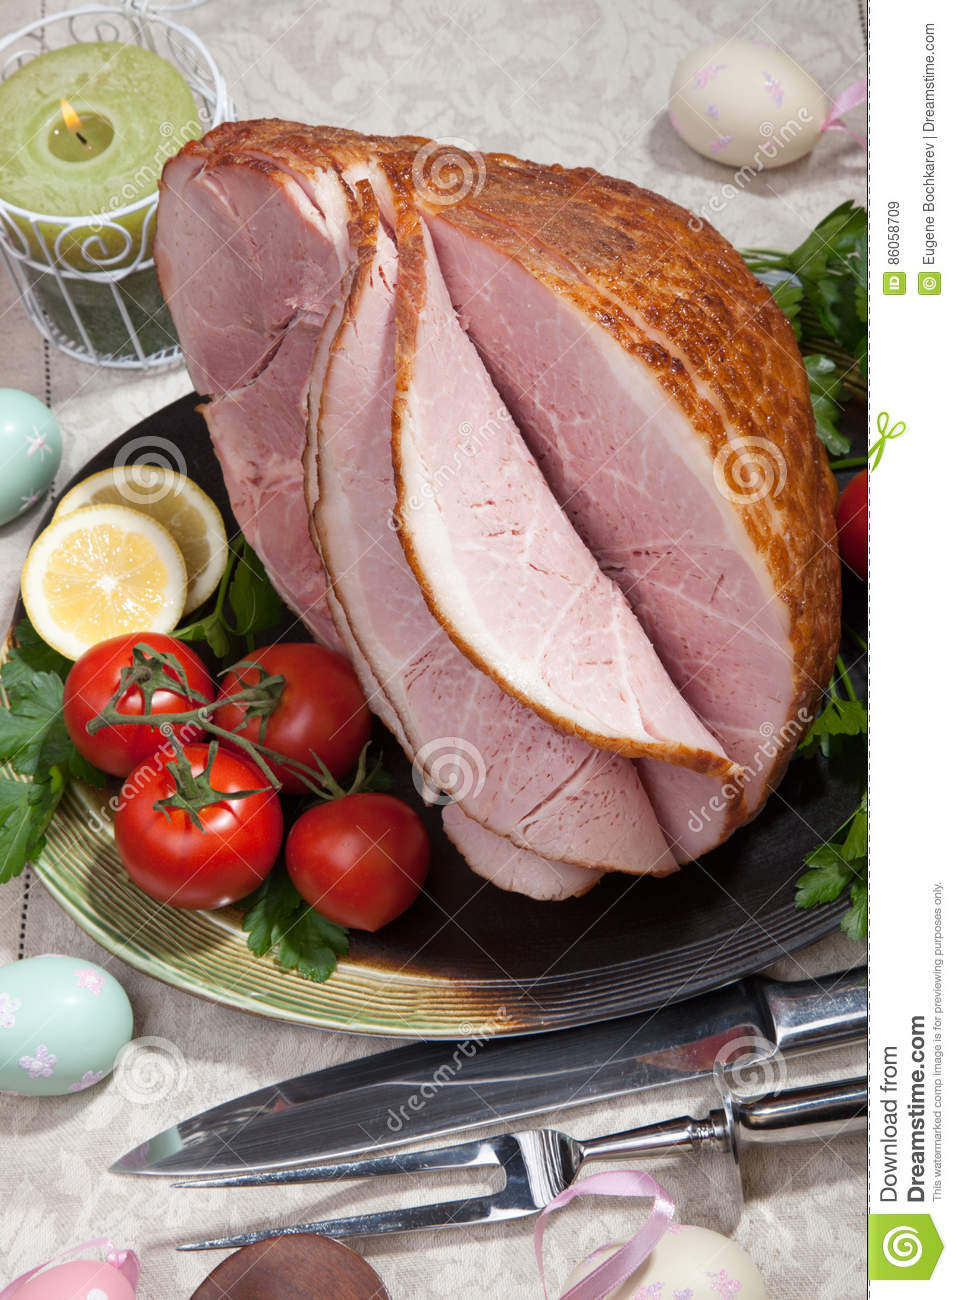 Baking Easter Ham
 Baked Easter Ham With Ve ables Stock Image Image of